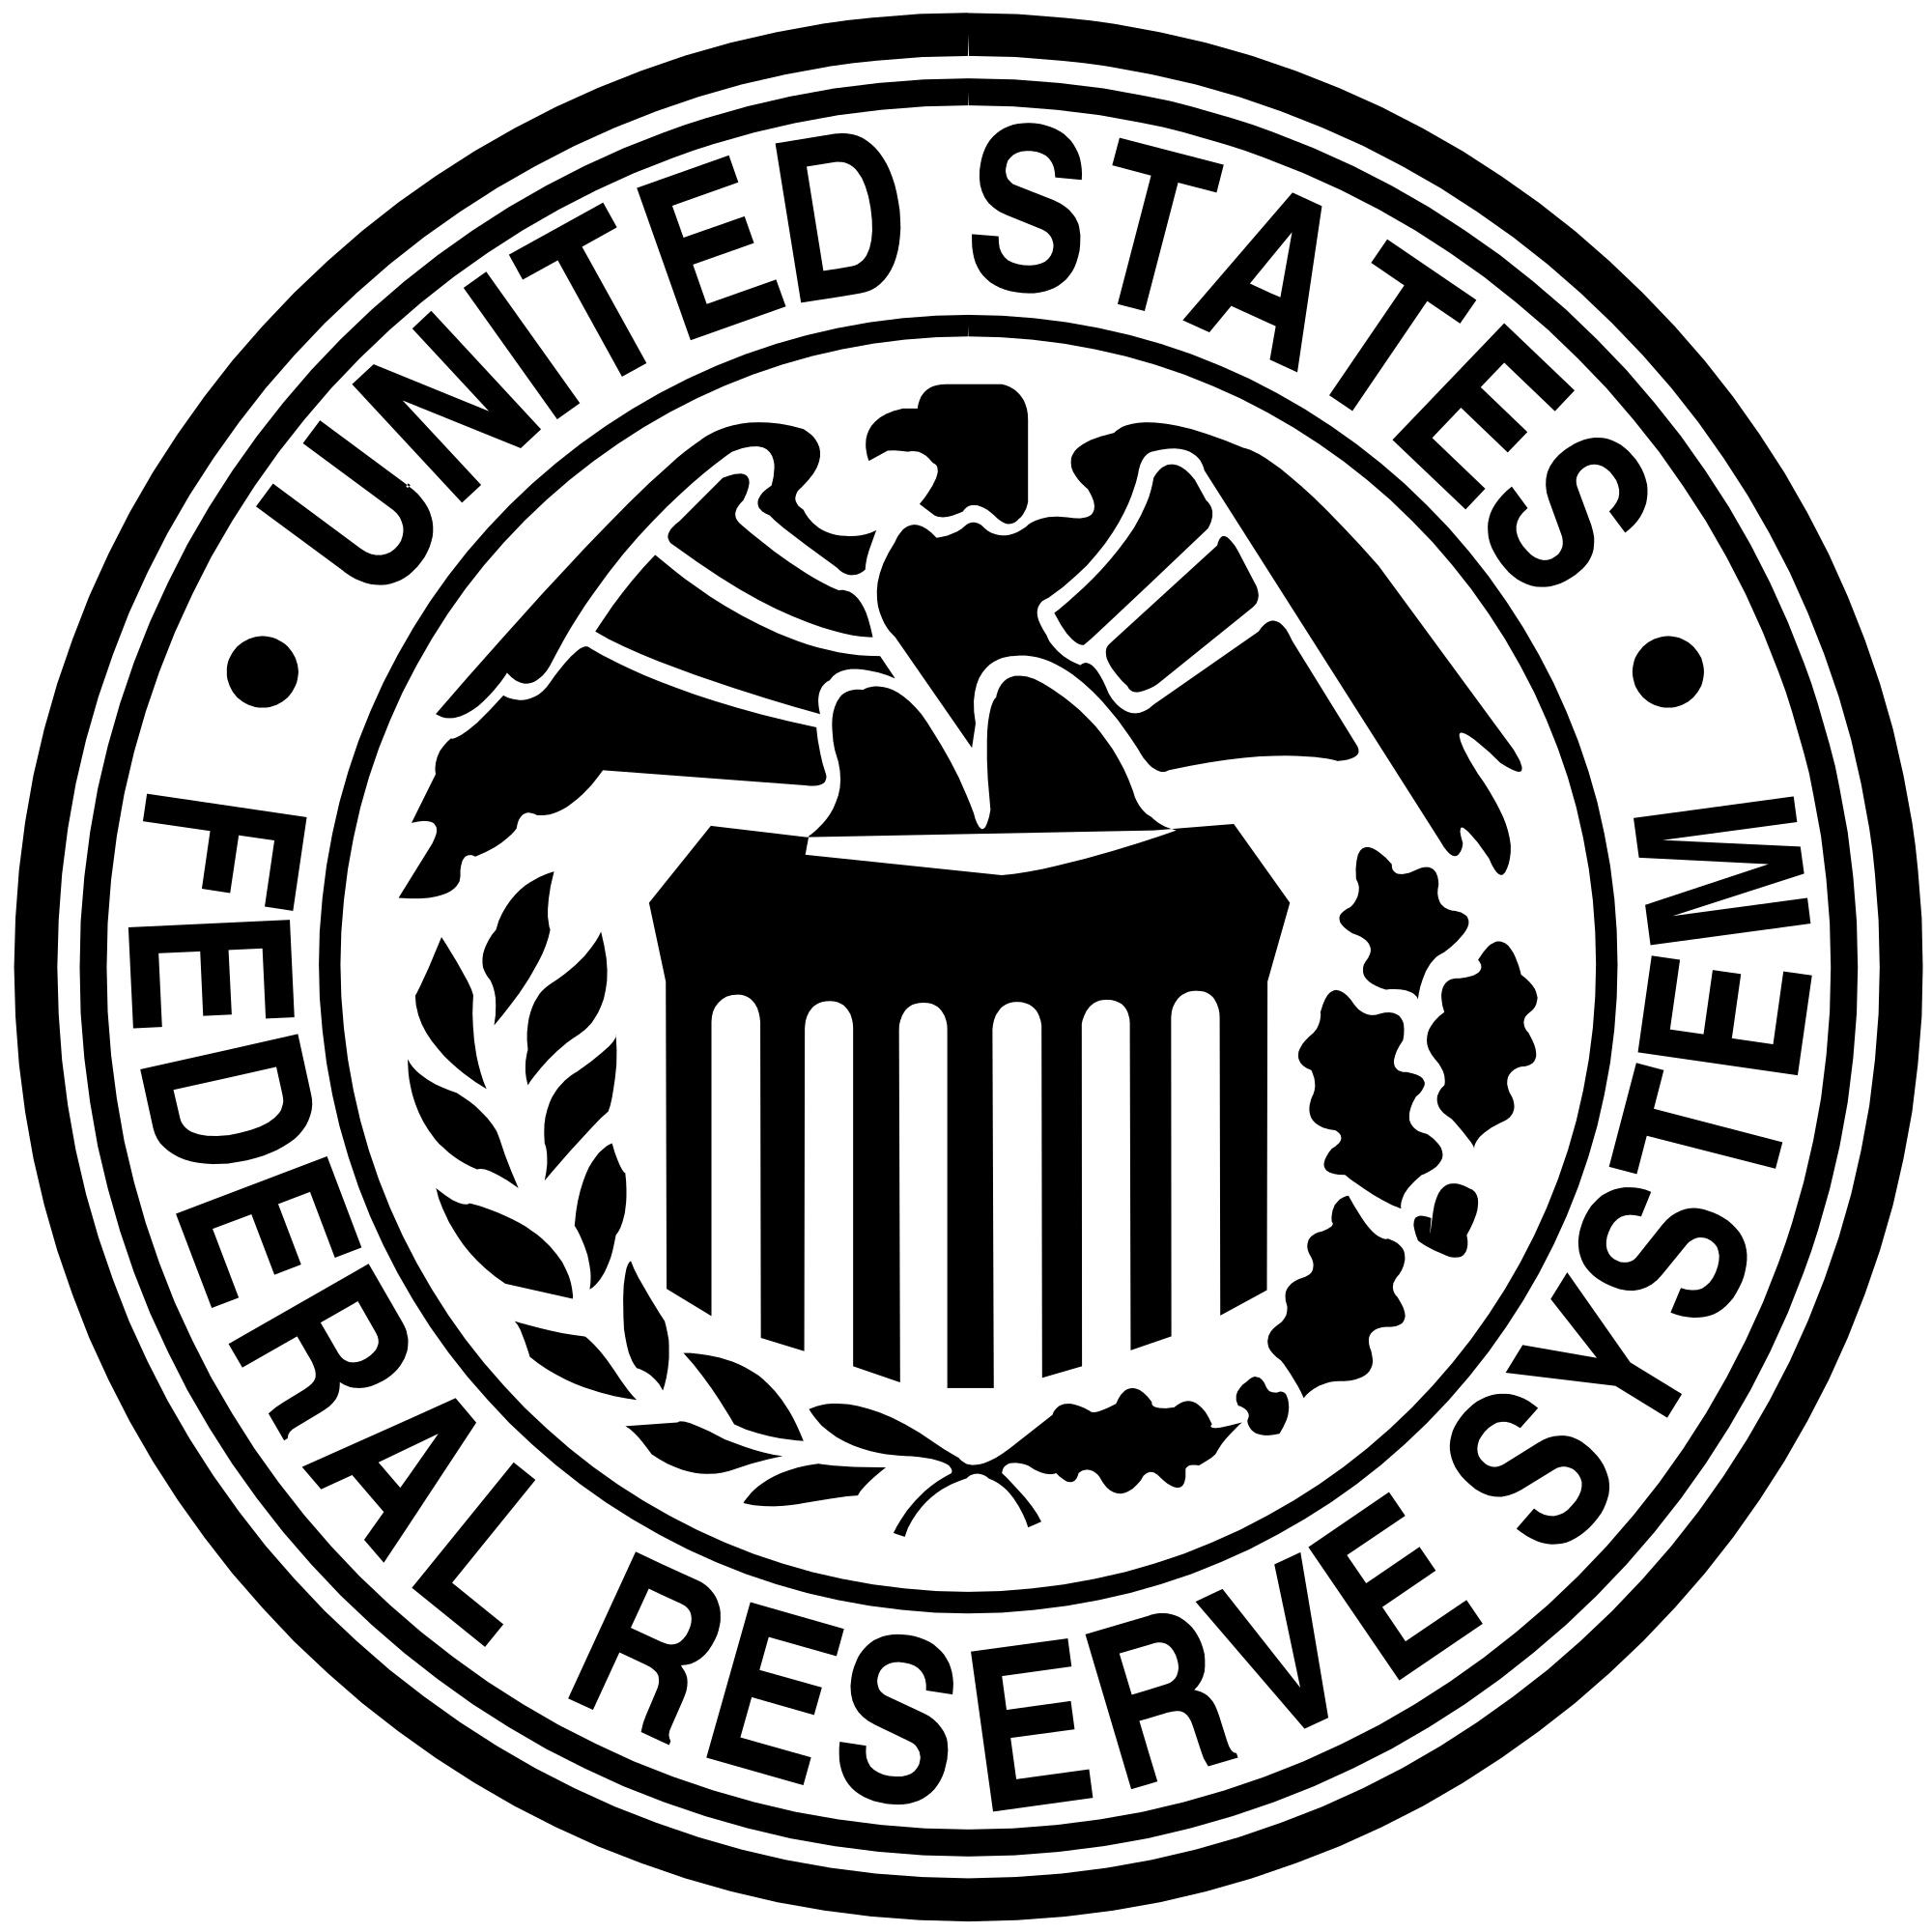 United States Logo - File:Seal of the United States Federal Reserve System.svg ...